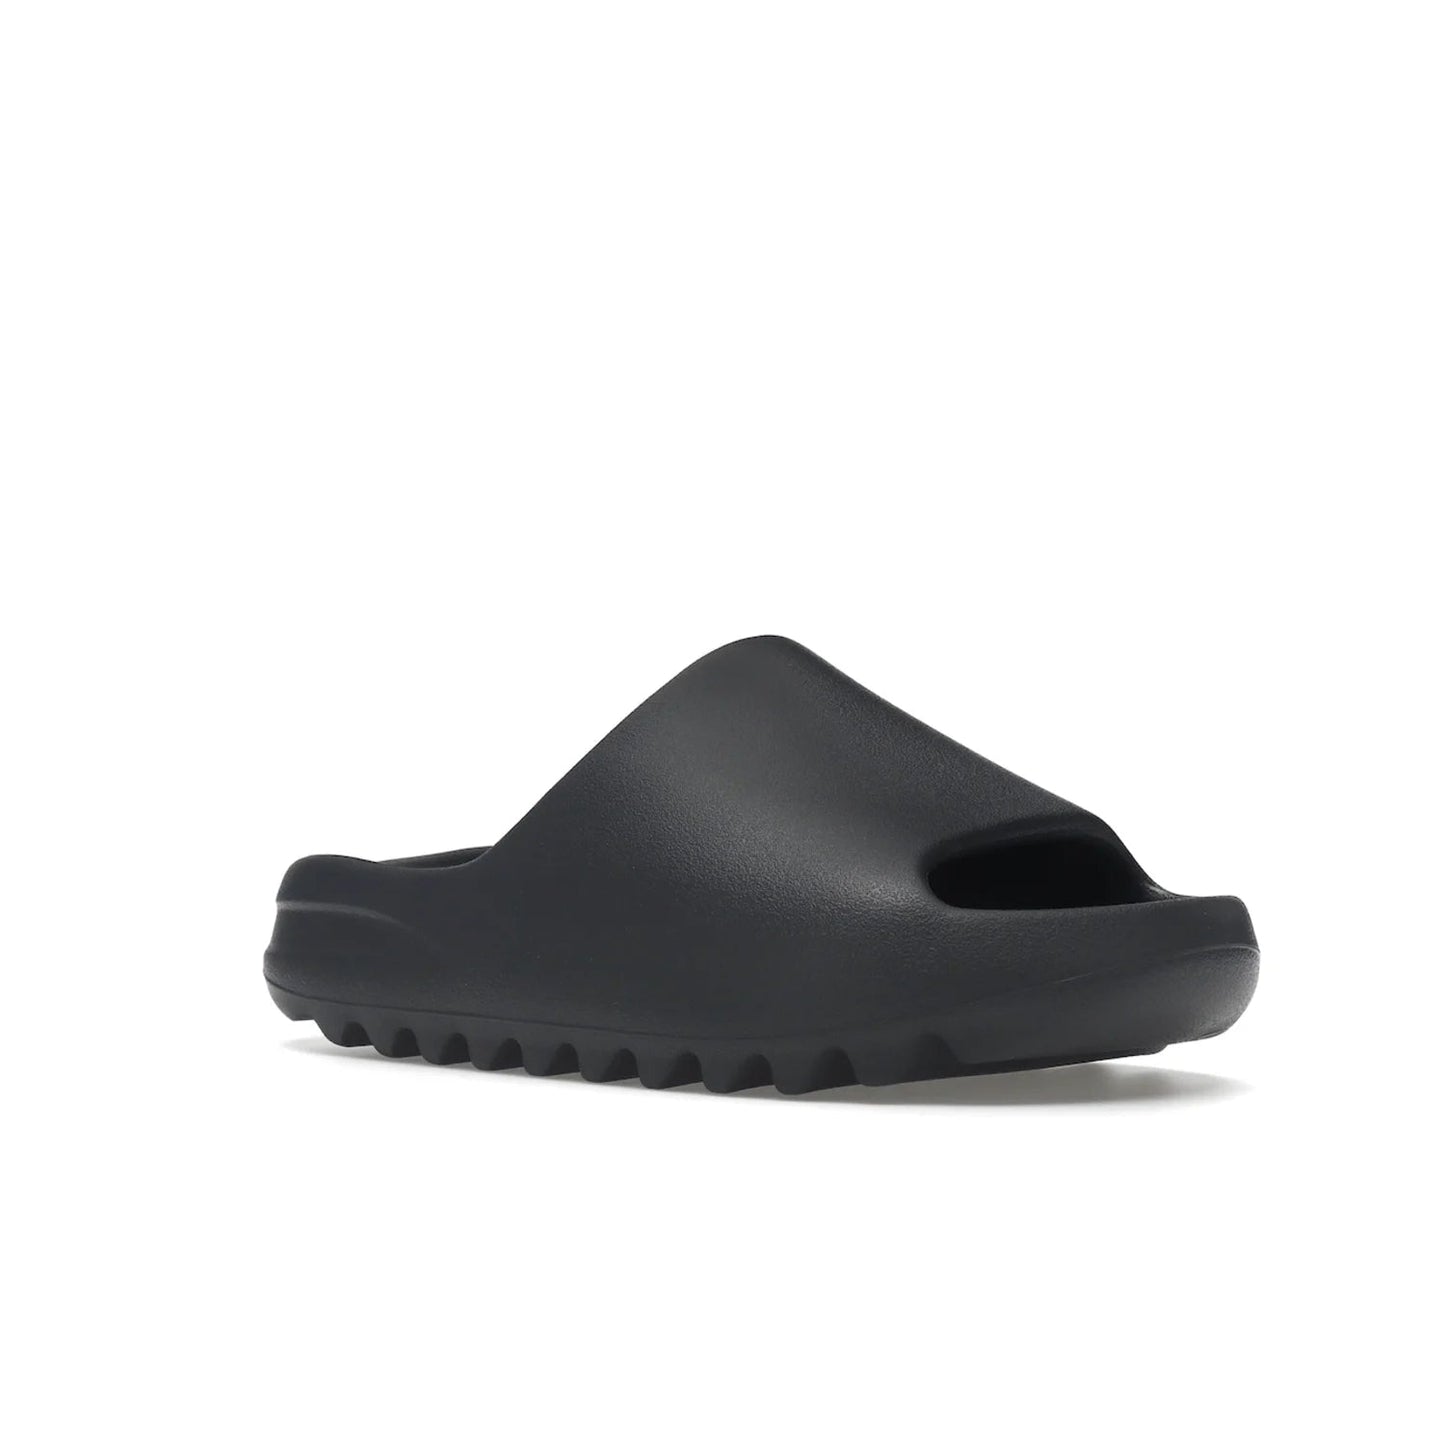 adidas Yeezy Slide Slate Grey - Image 5 - Only at www.BallersClubKickz.com - Stylish & comfortable adidas Yeezy Slide Slate Grey features an EVA foam upper, strategic cutouts, textured outsole pattern, & easy slip-on design for modern comfort & classic style.